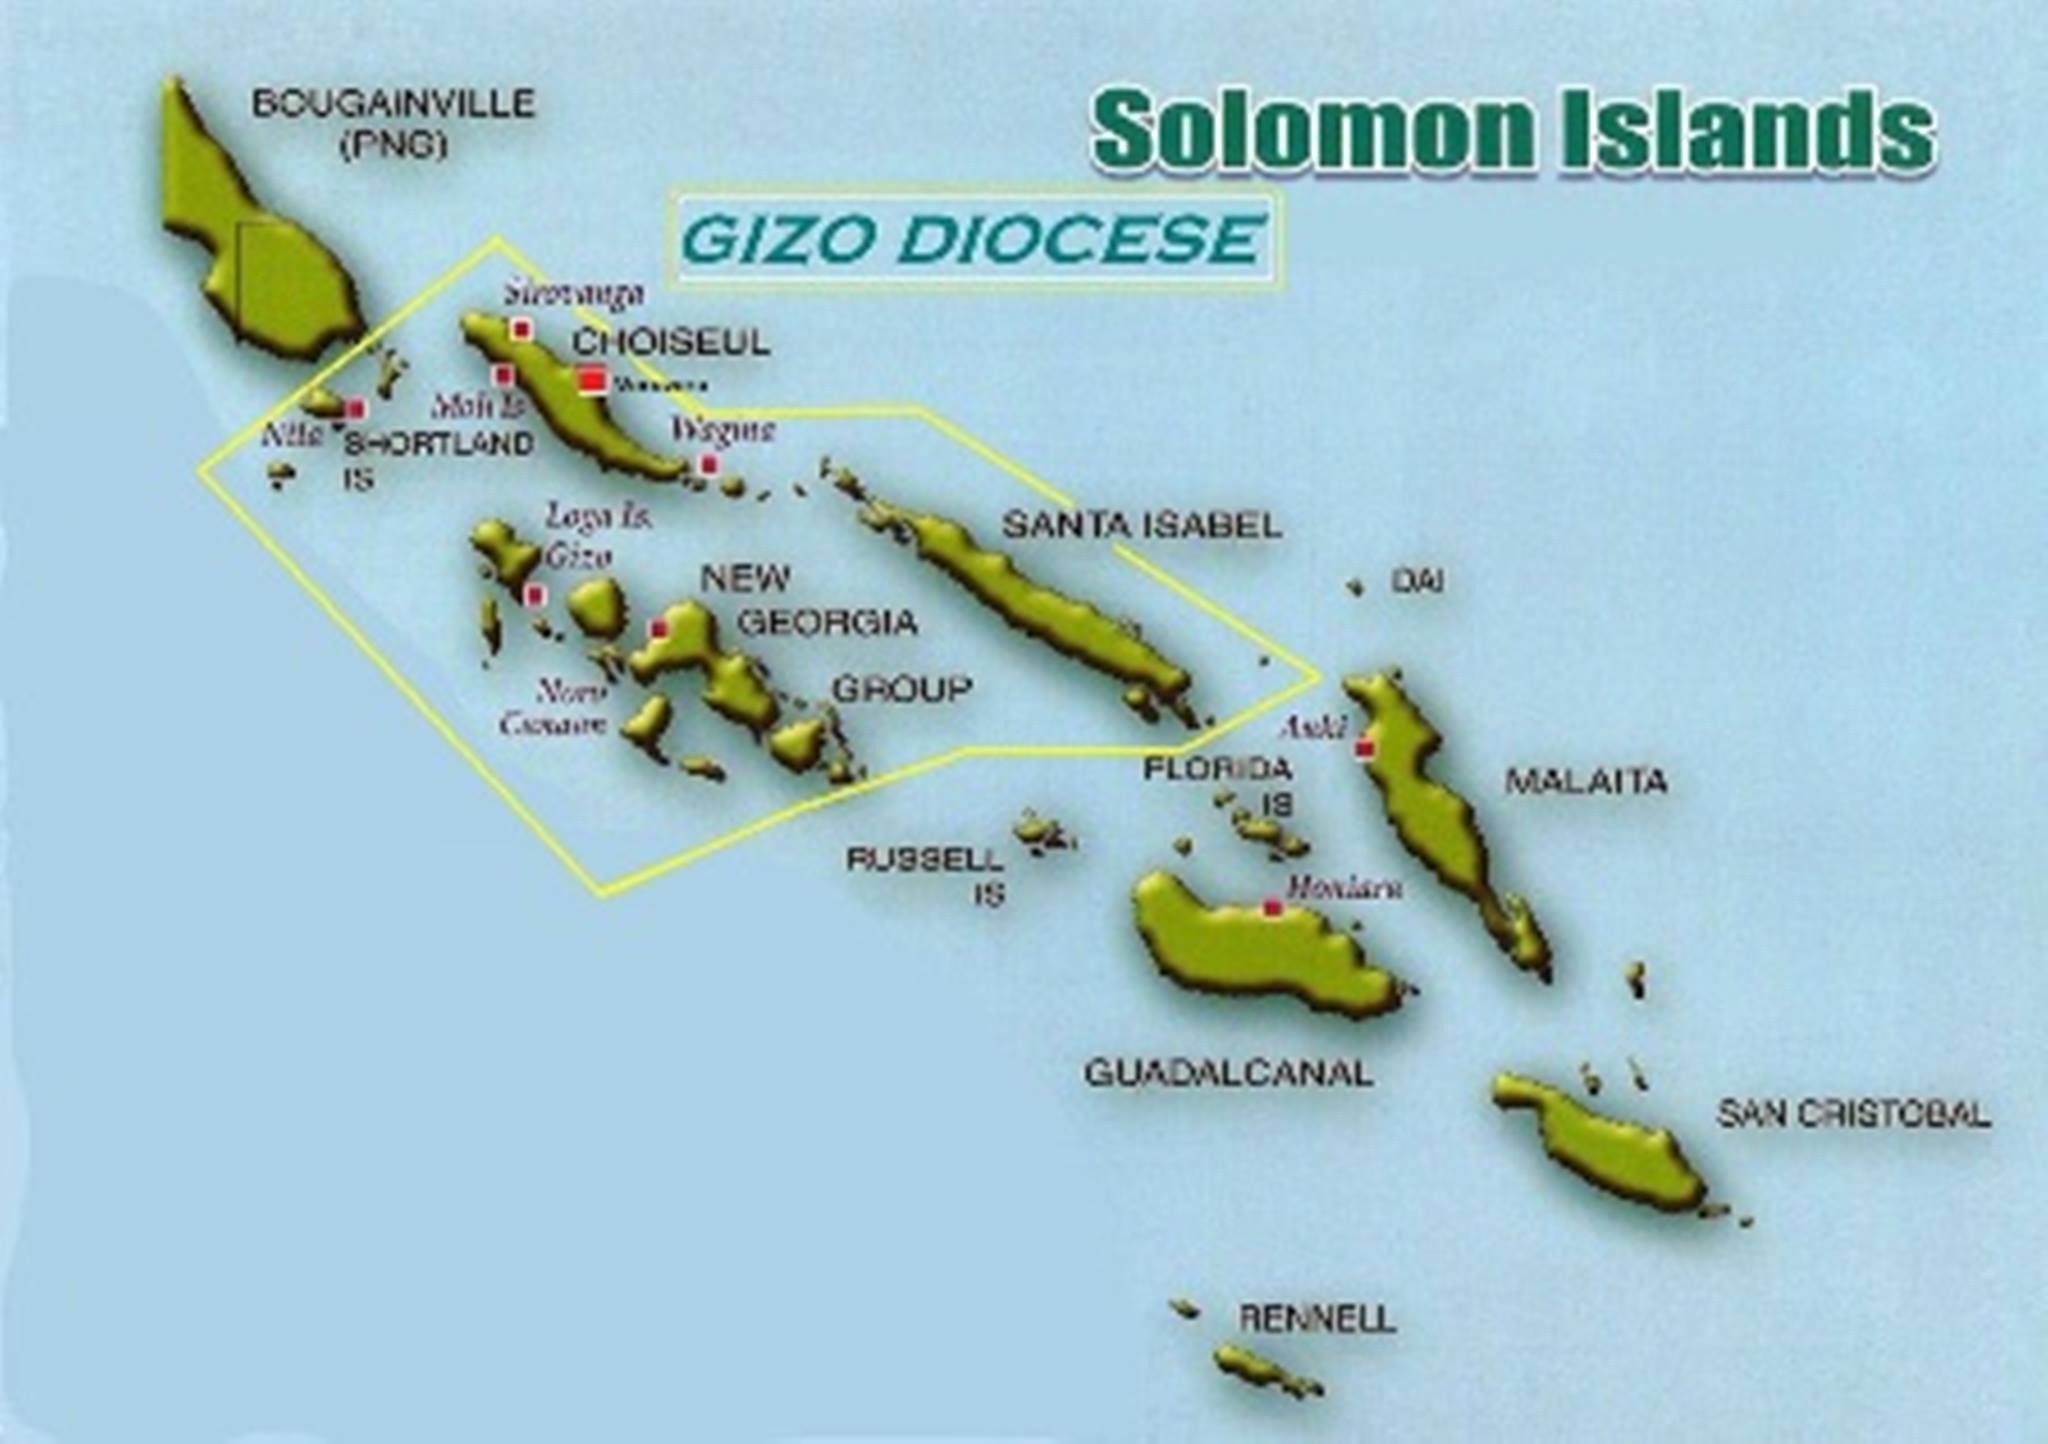 gizo diocese